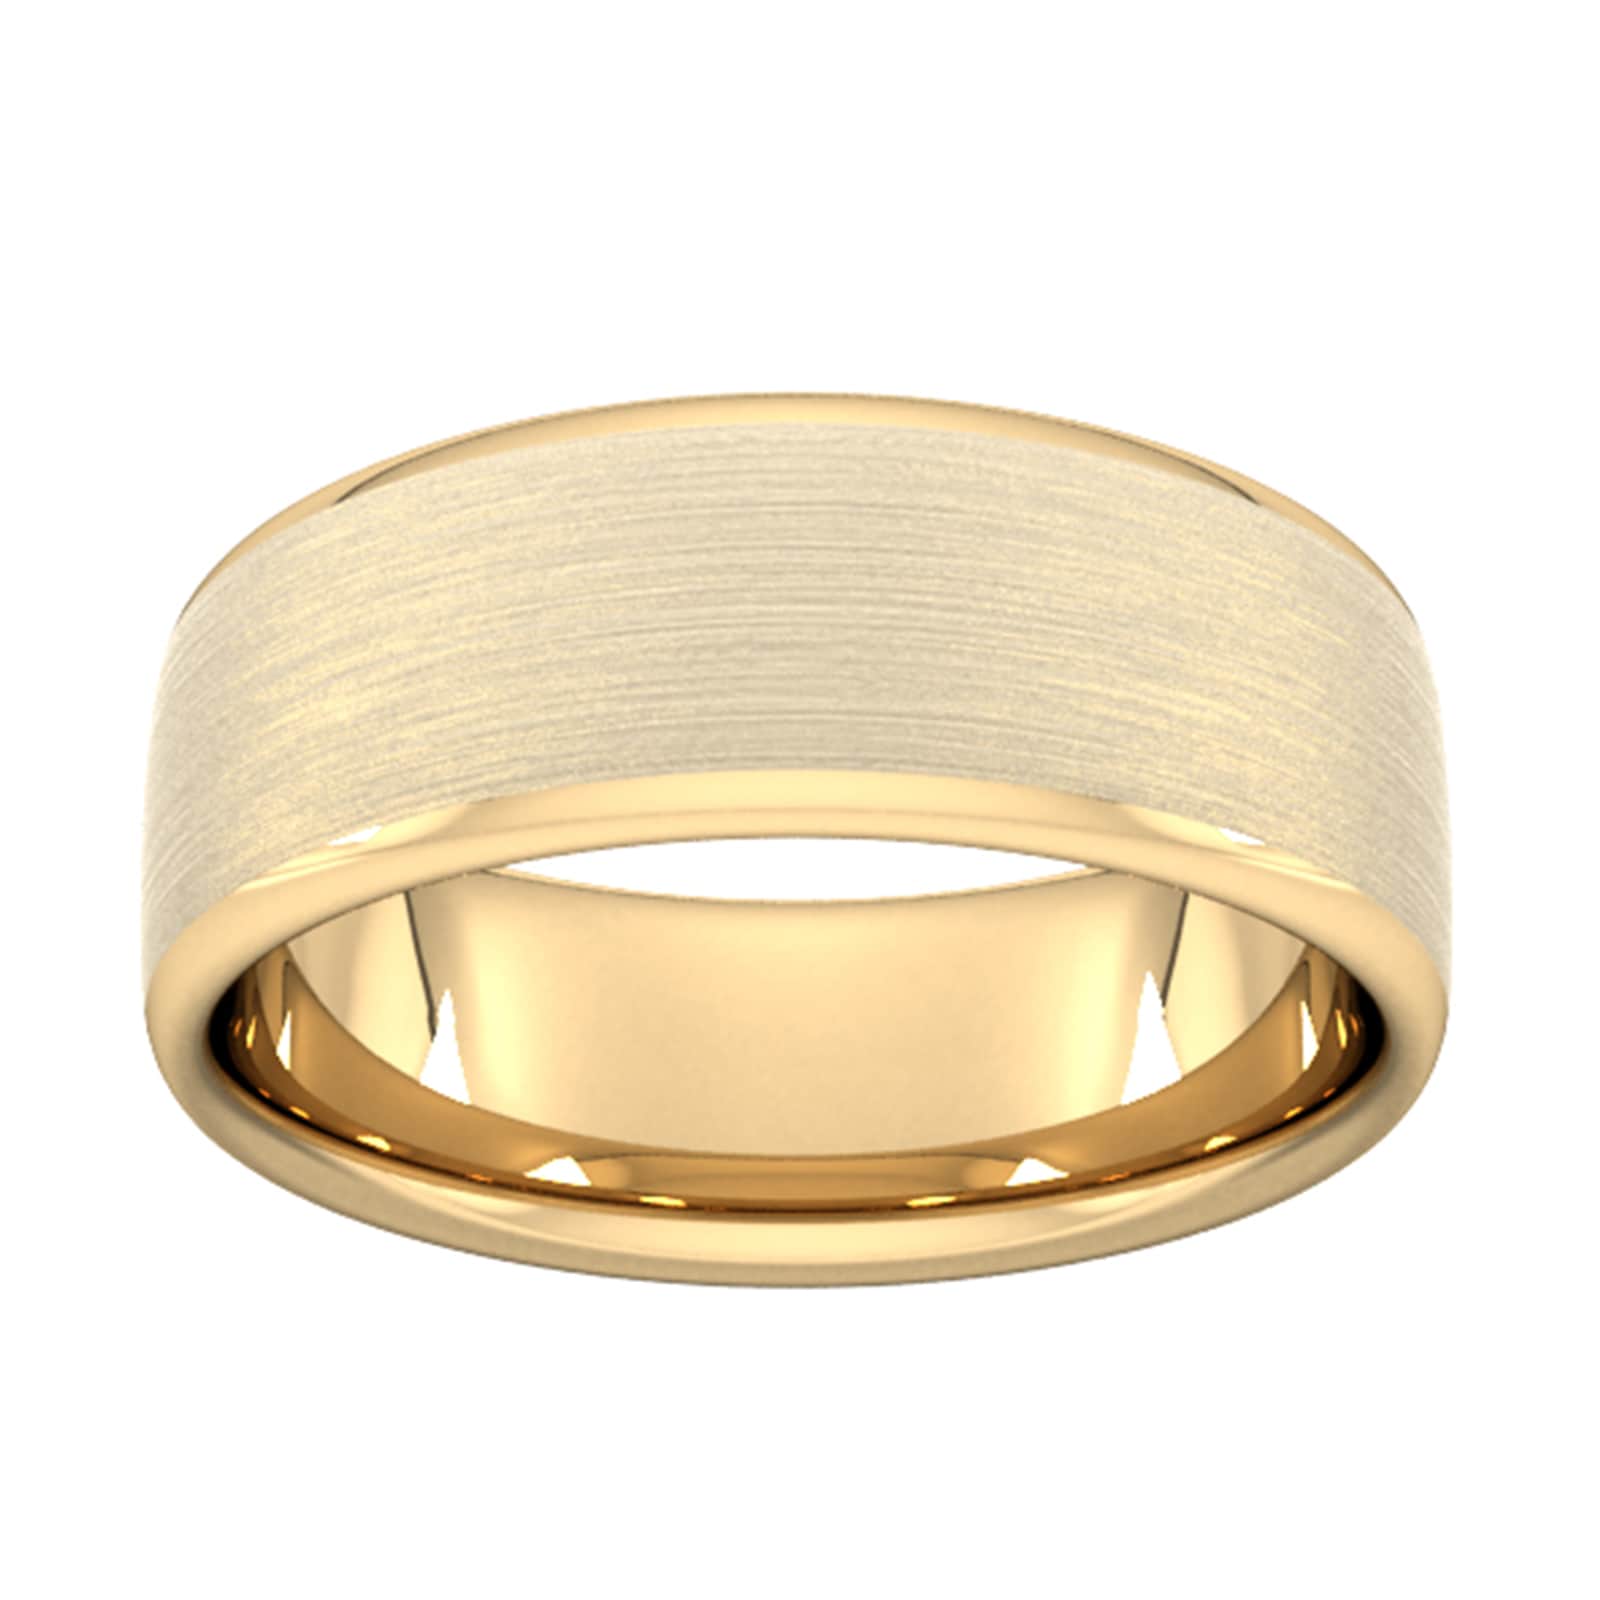 8mm Traditional Court Standard Matt Finished Wedding Ring In 9 Carat Yellow Gold - Ring Size J